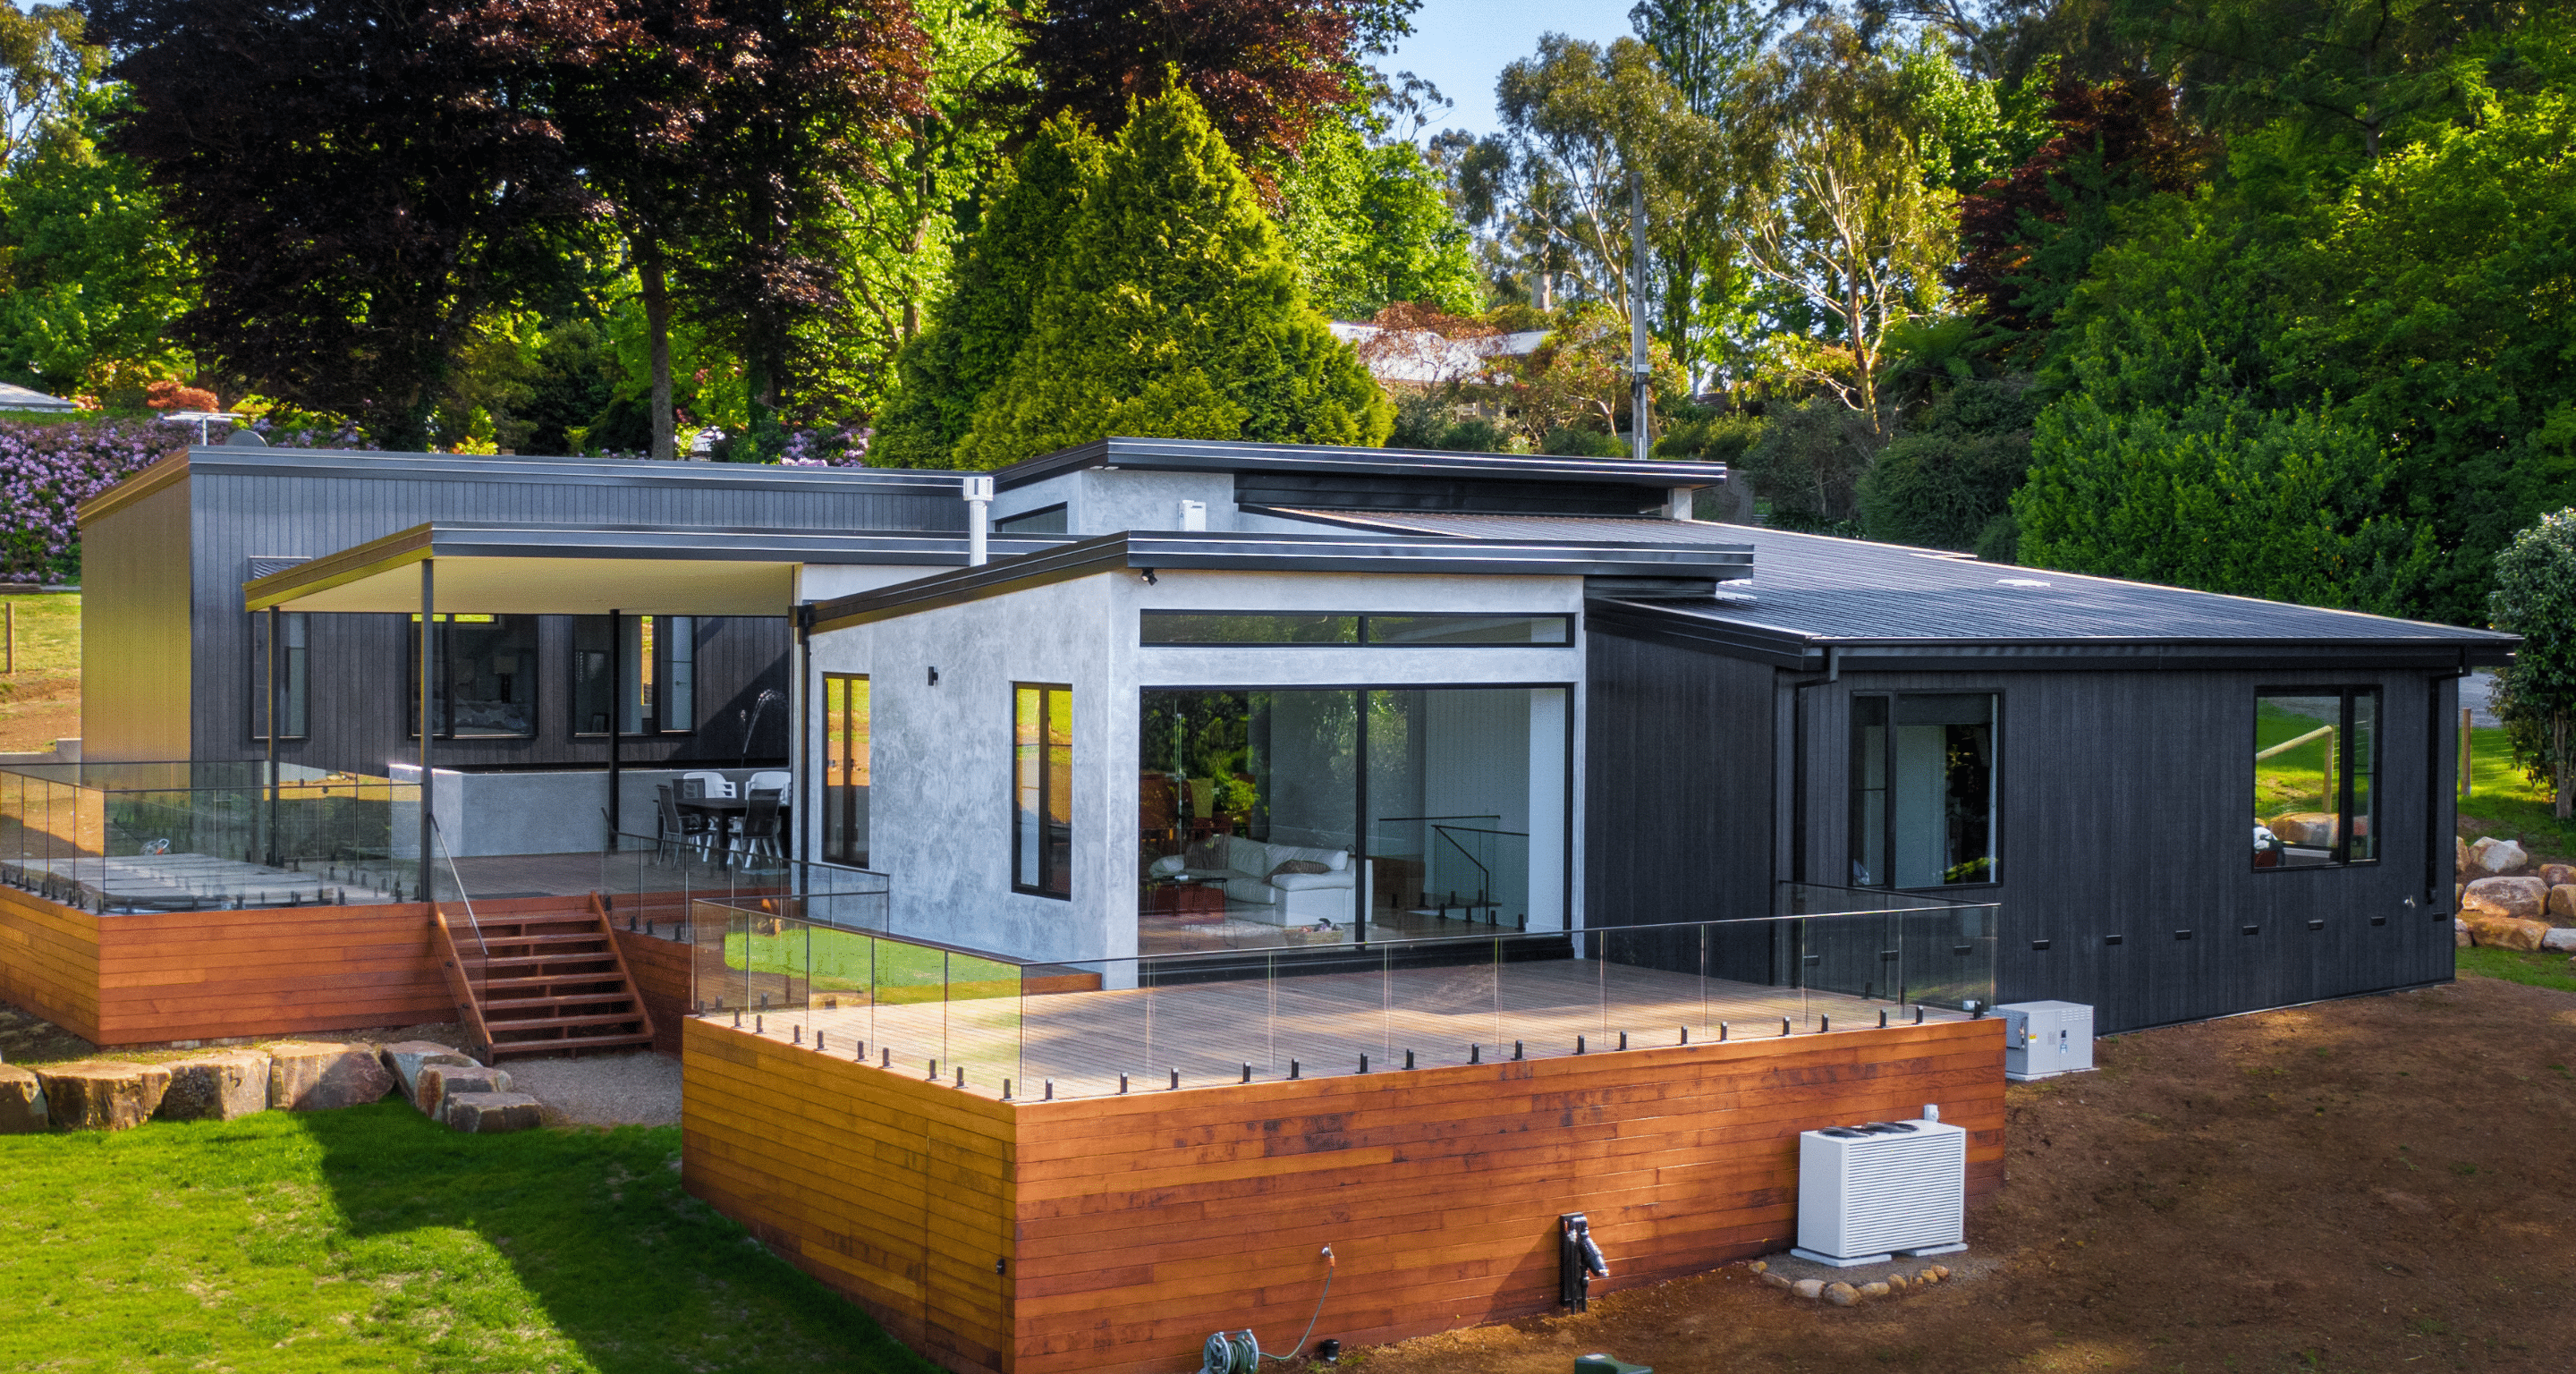 An energy-efficient home in the Yarra Valley, Victoria.